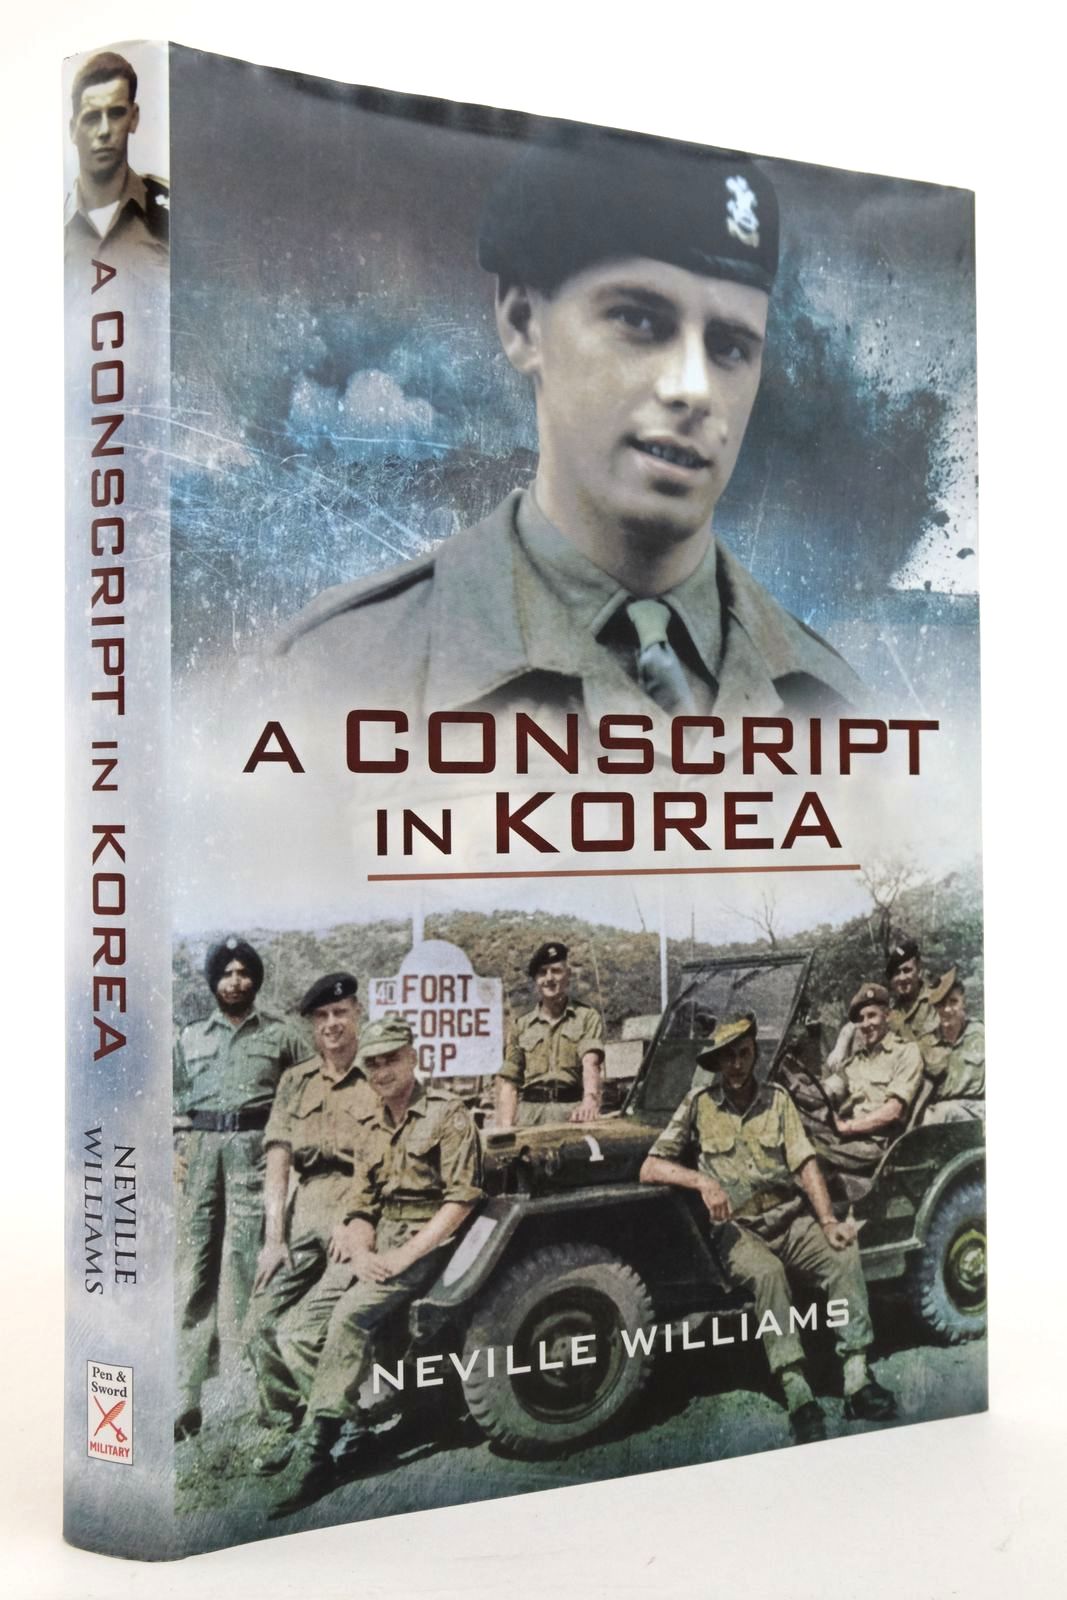 Photo of A CONSCRIPT IN KOREA written by Williams, Neville published by Pen & Sword Military (STOCK CODE: 2138101)  for sale by Stella & Rose's Books